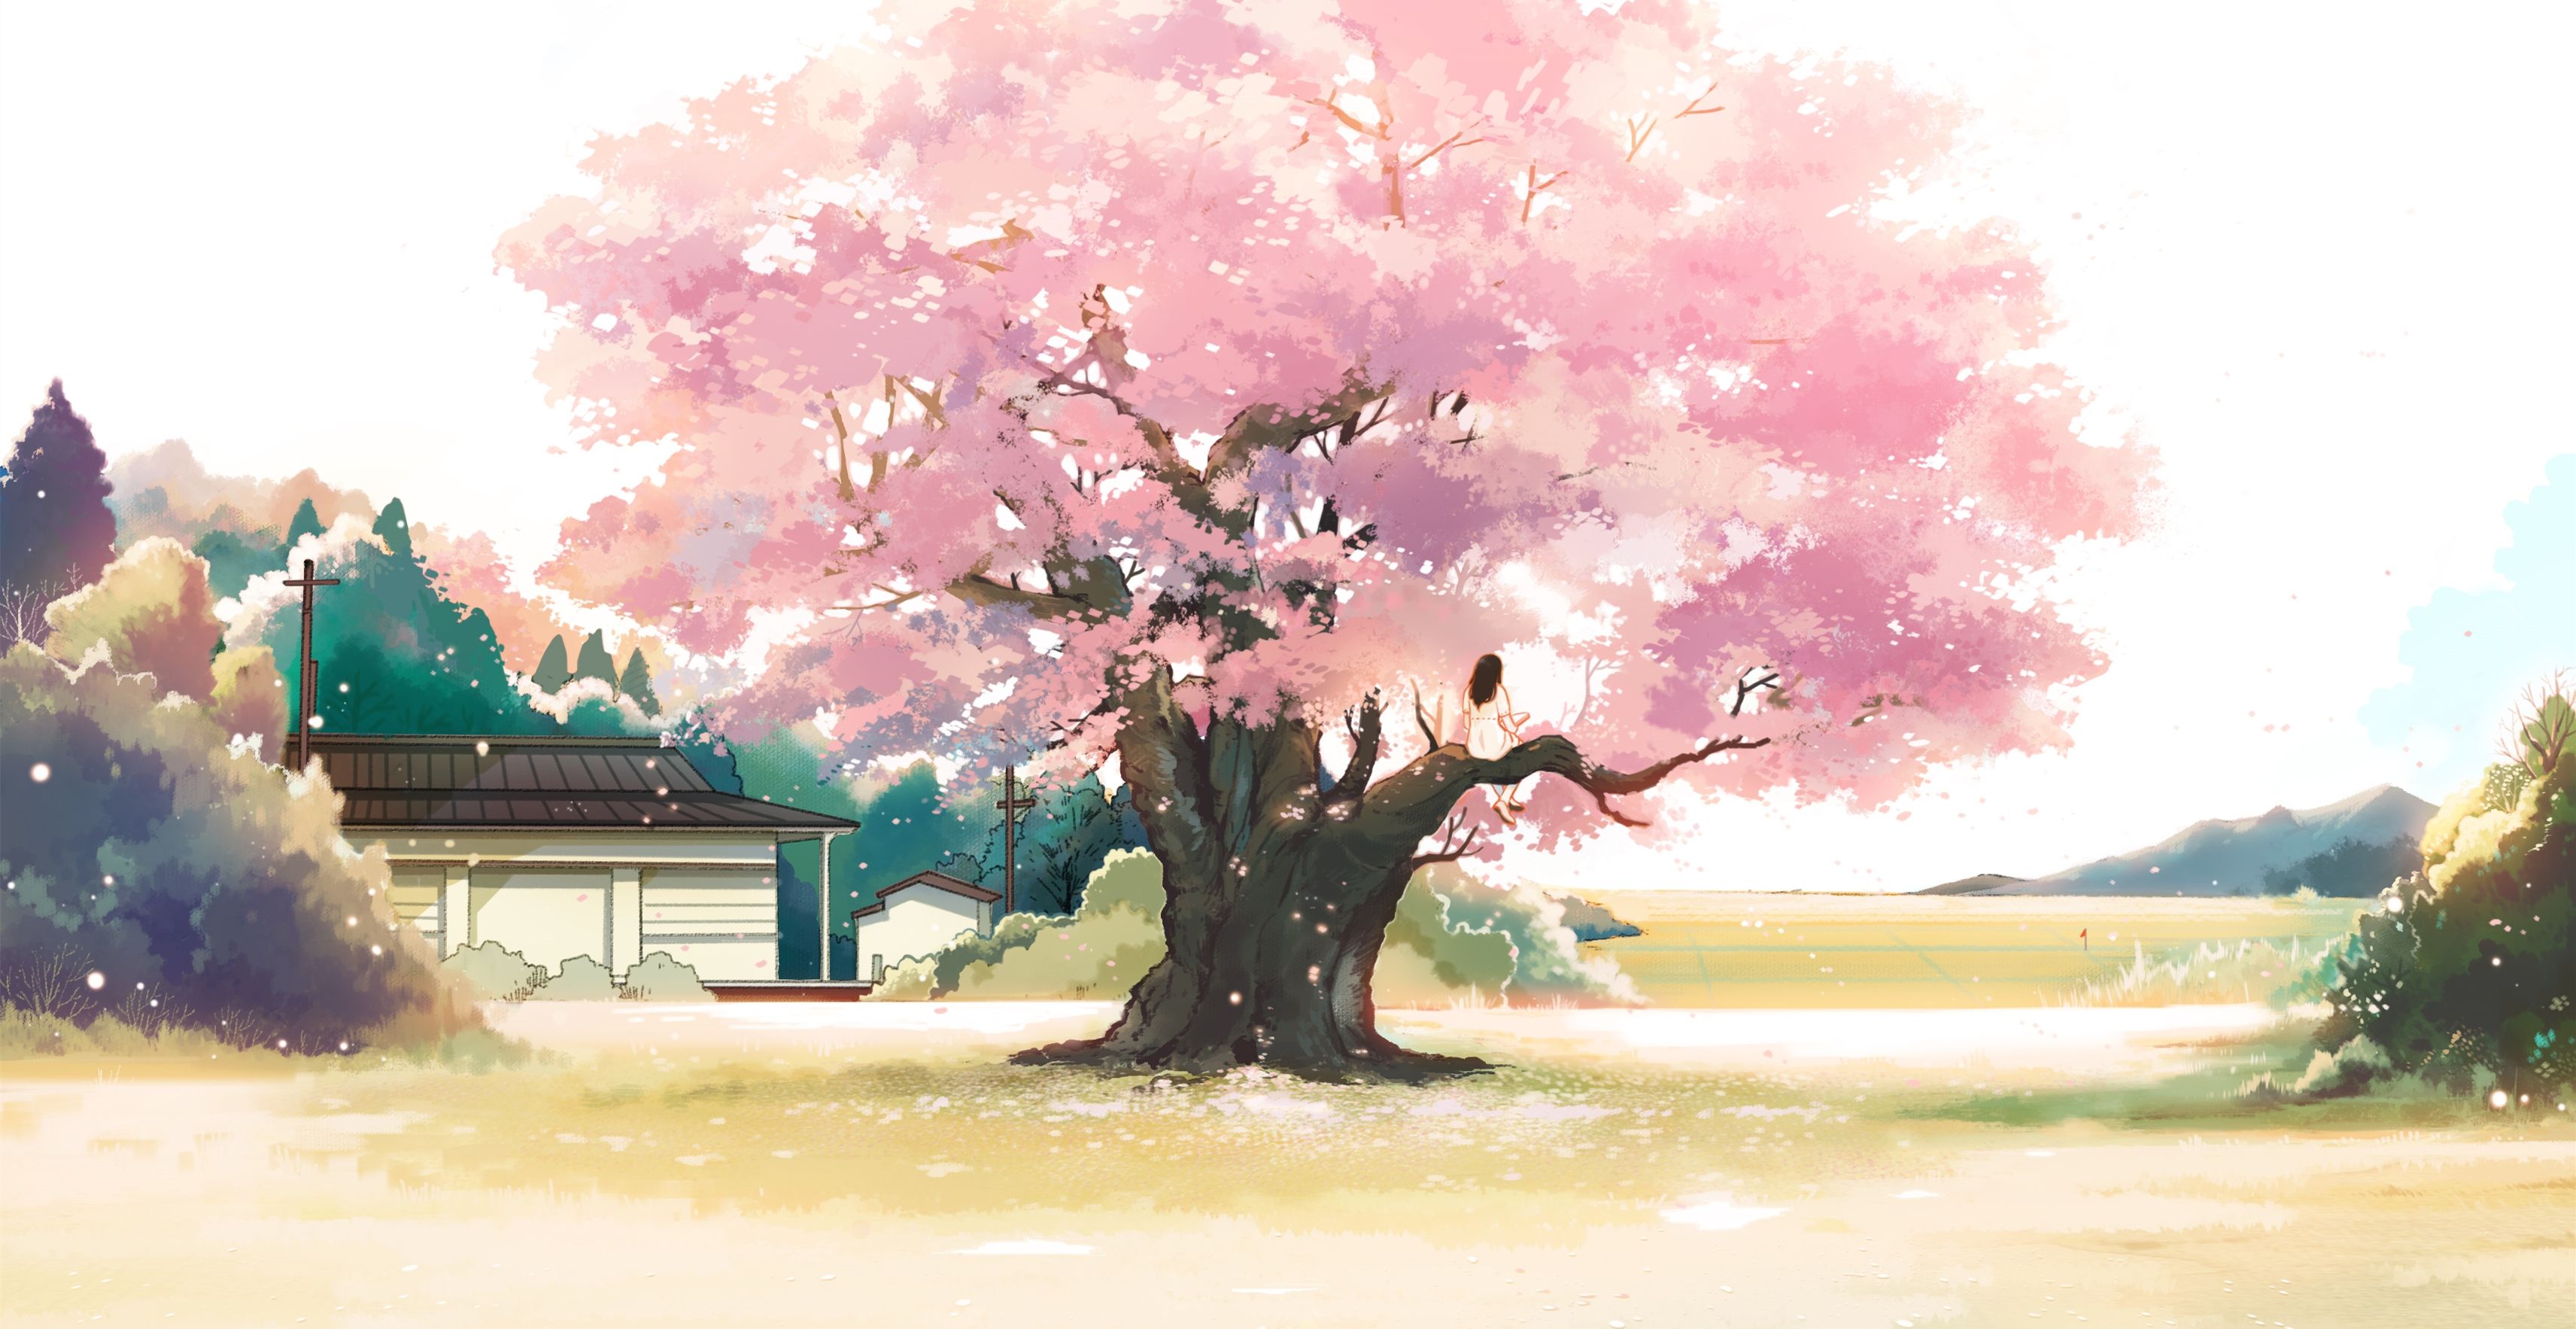 Download 3424x1766 Anime Landscape, Girl, Cherry Blossom, Pink Leaves, Tree, Scenic Wallpaper